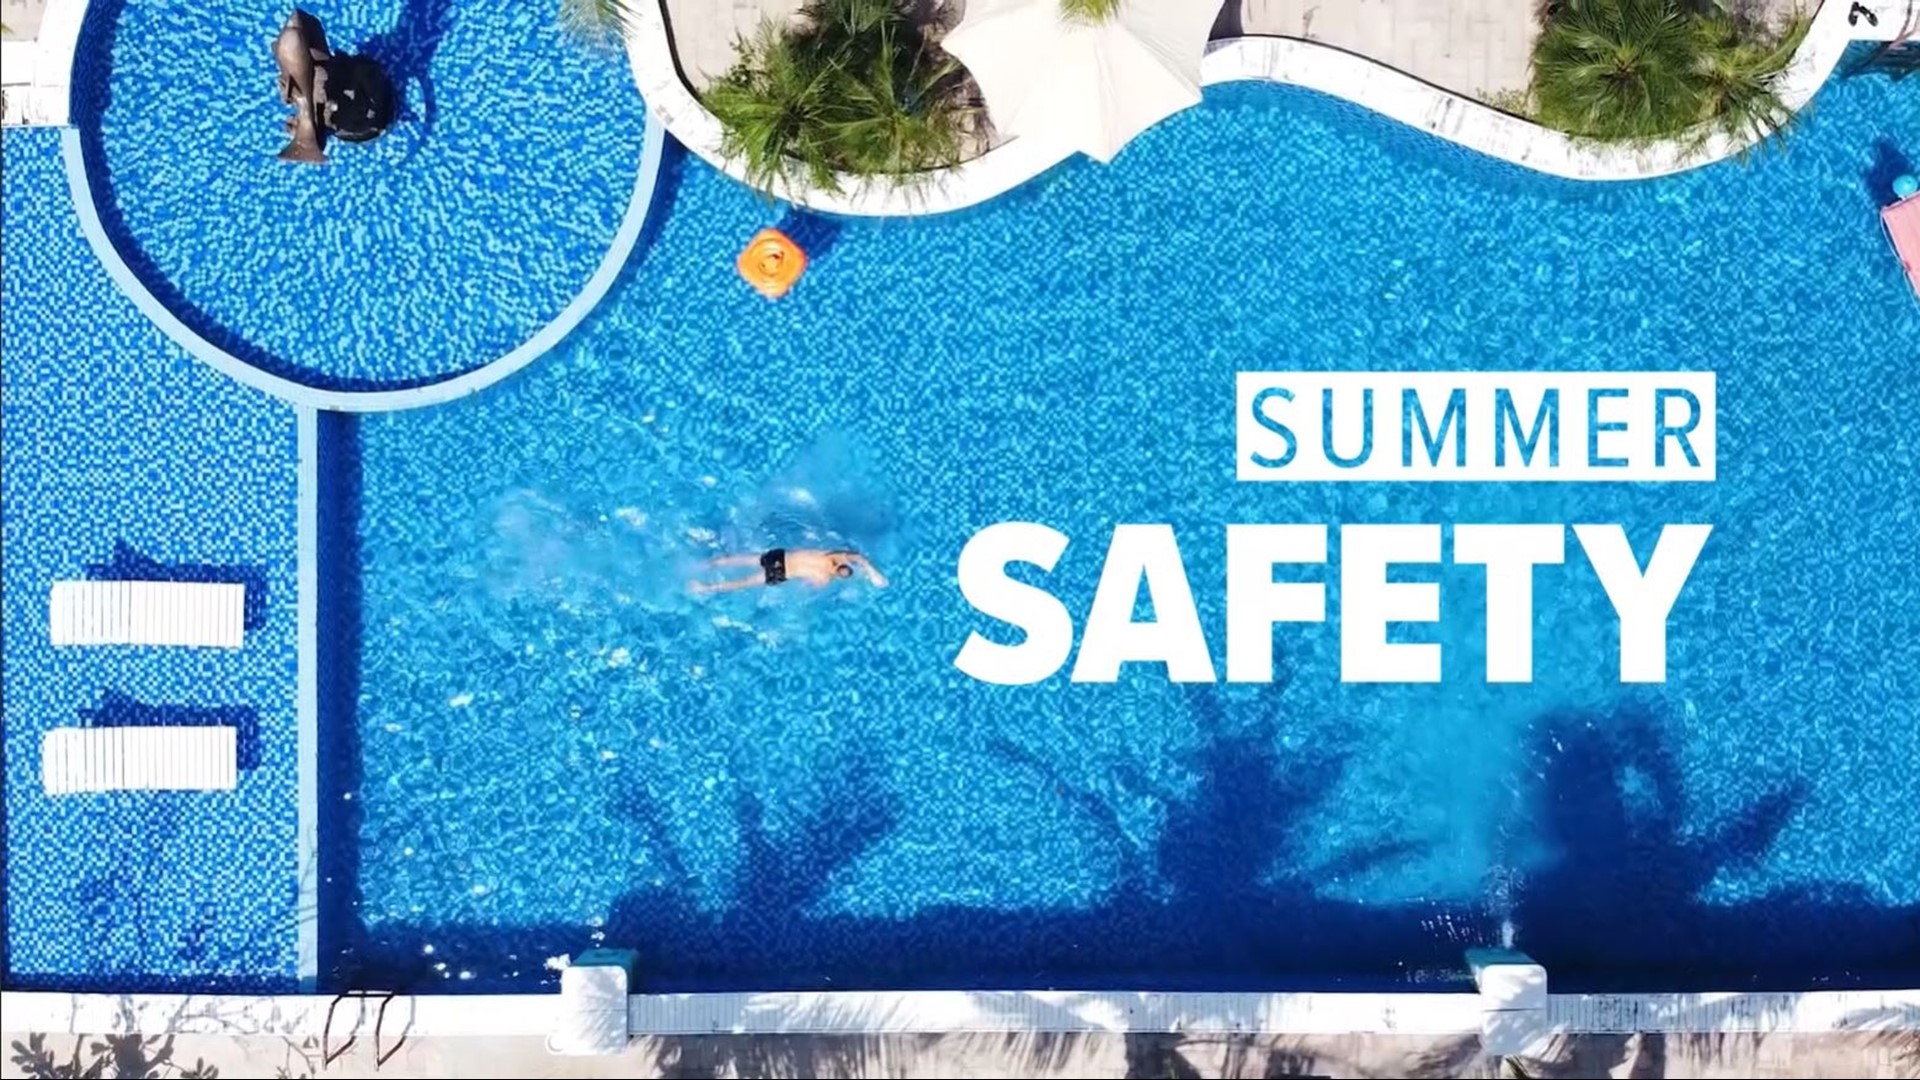 Important information to keep kids and your family safe this summer. From boating safety tips to why swimsuit colors matter, how to properly grill and more.